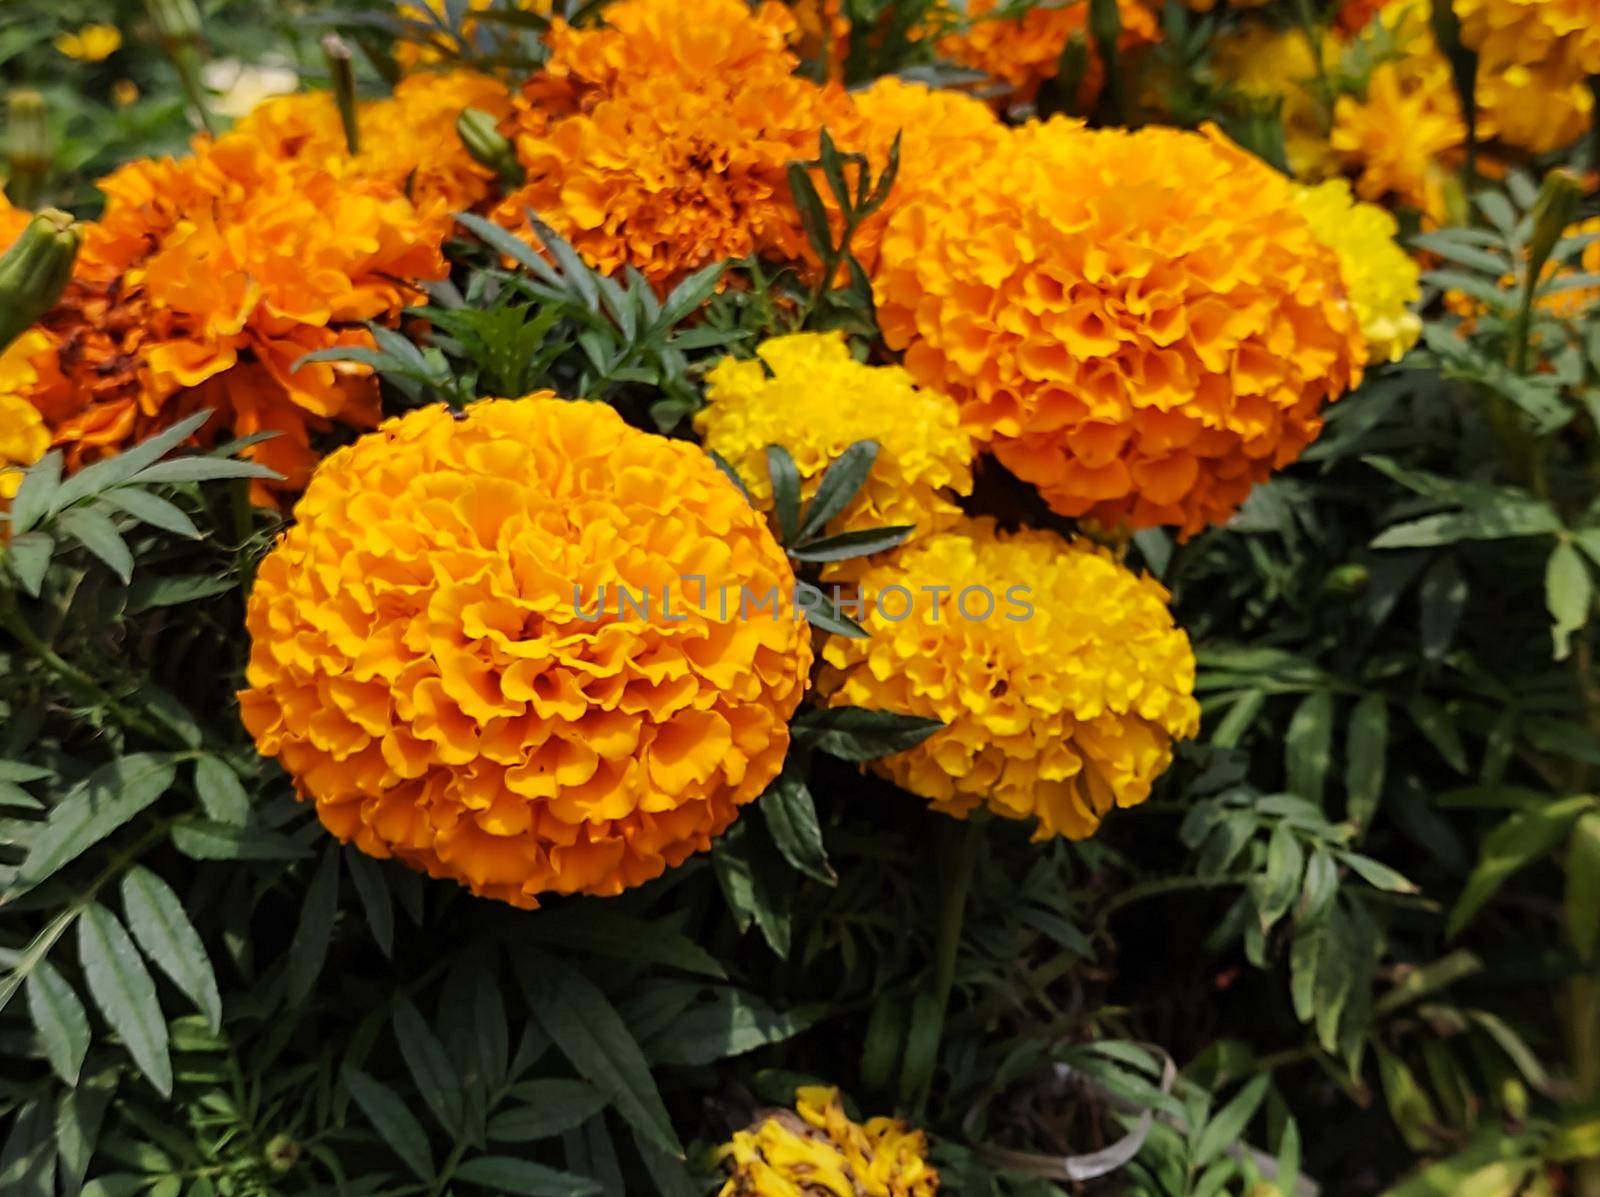 Close-up of flowers and leaves of the yellow marigold (Marigold) or yellow carnation flower, in a garden bed.